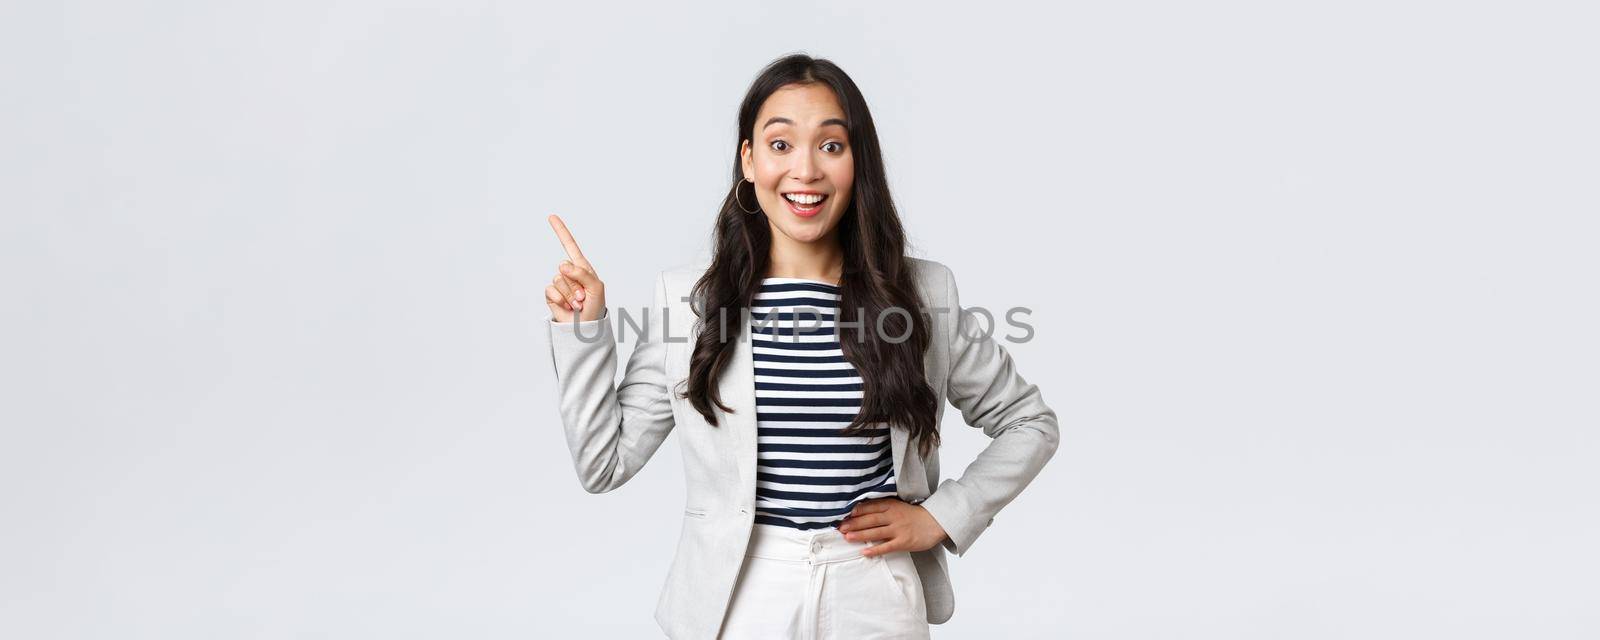 Business, finance and employment, female successful entrepreneurs concept. Cheerful successful businesswoman in white suit pointing fingers upper left corner, showing advertisement.